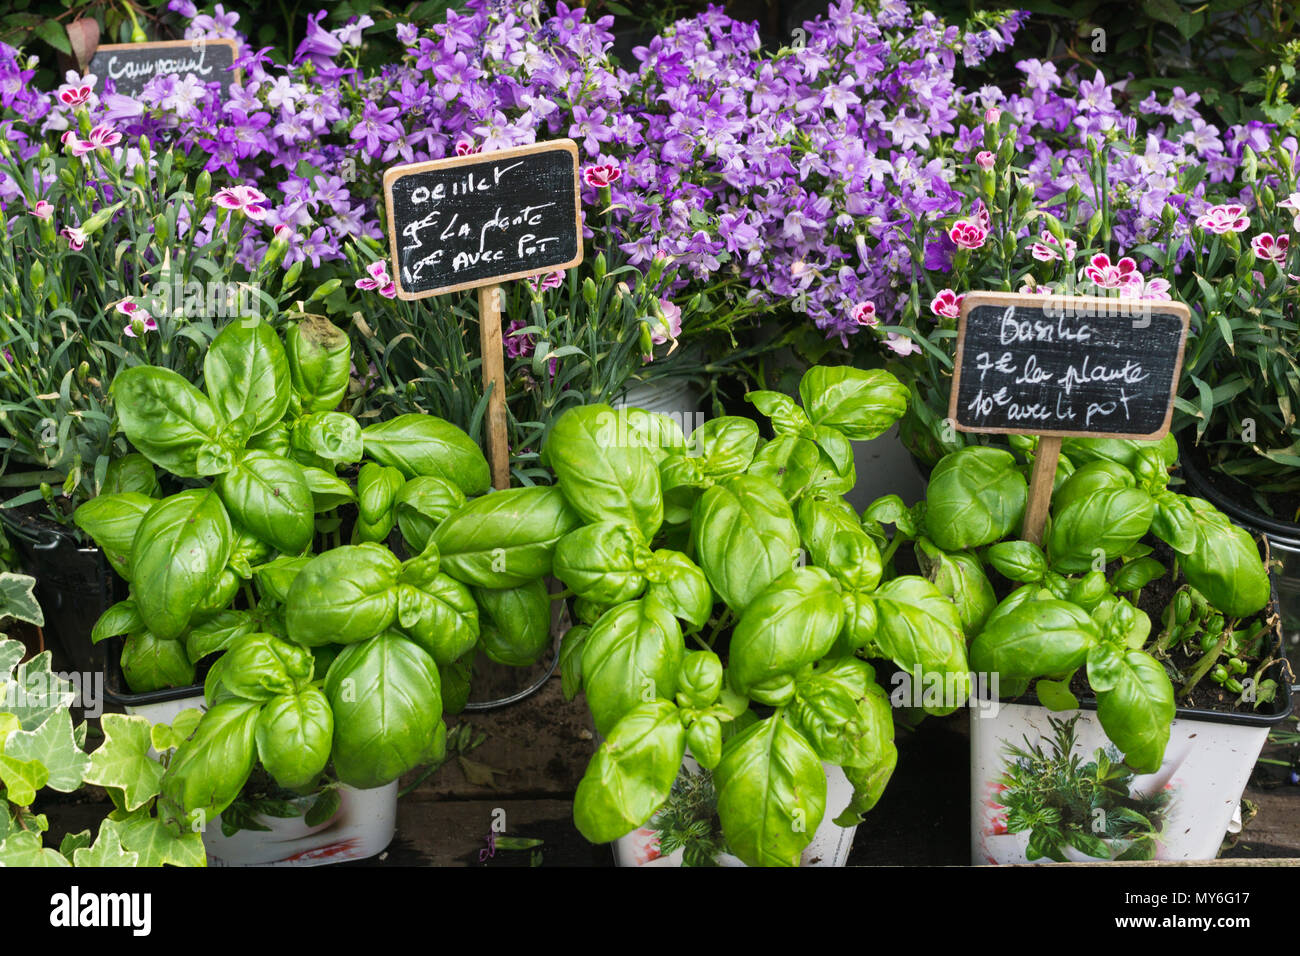 Basilic, carnation flower, and other pot plants selling in Paris, France. Stock Photo